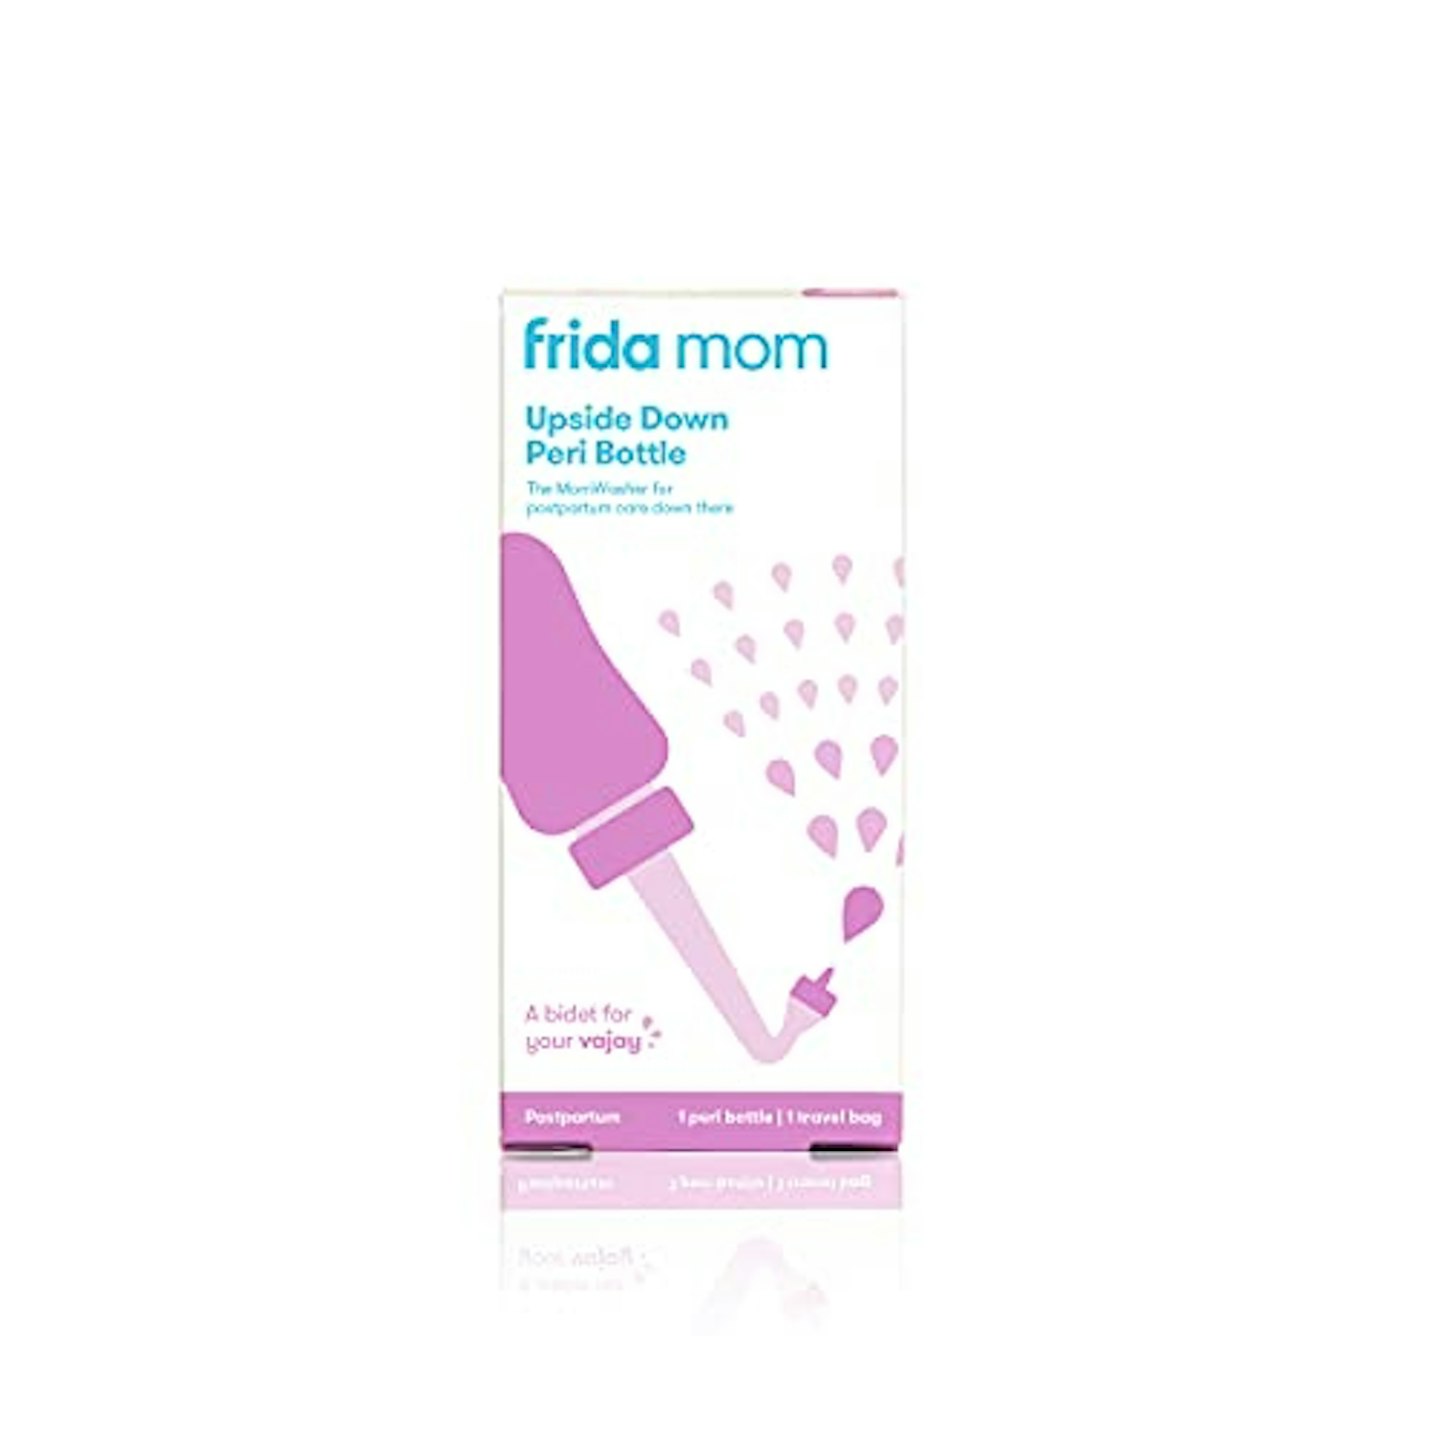 Ninja Mama Peri Bottle • Products for Mums-to-Be